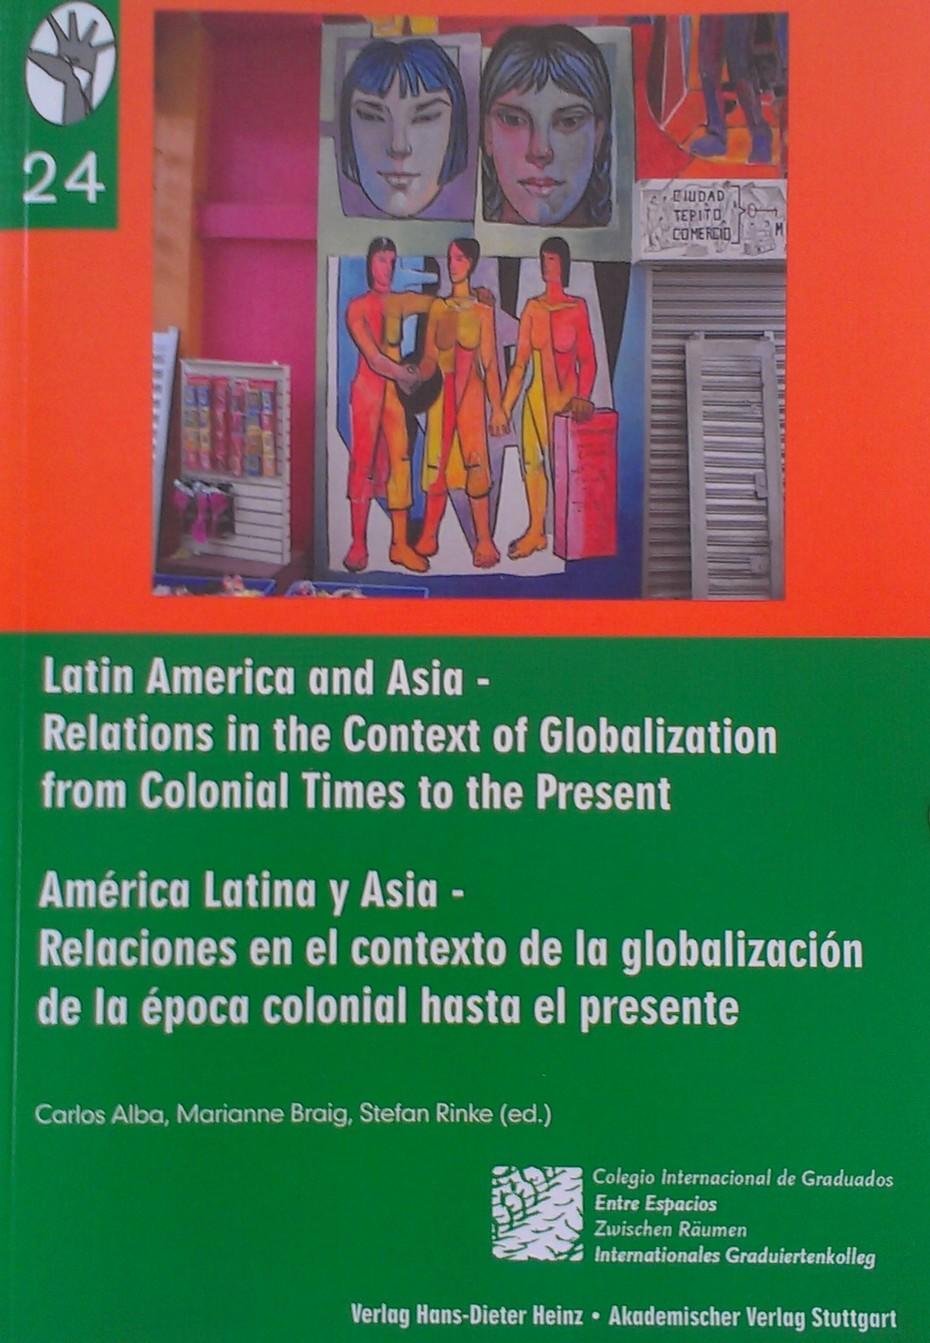 braig_rinke_alba_Latin America and Asia - relations in the context of globalization from colonial Times to the present